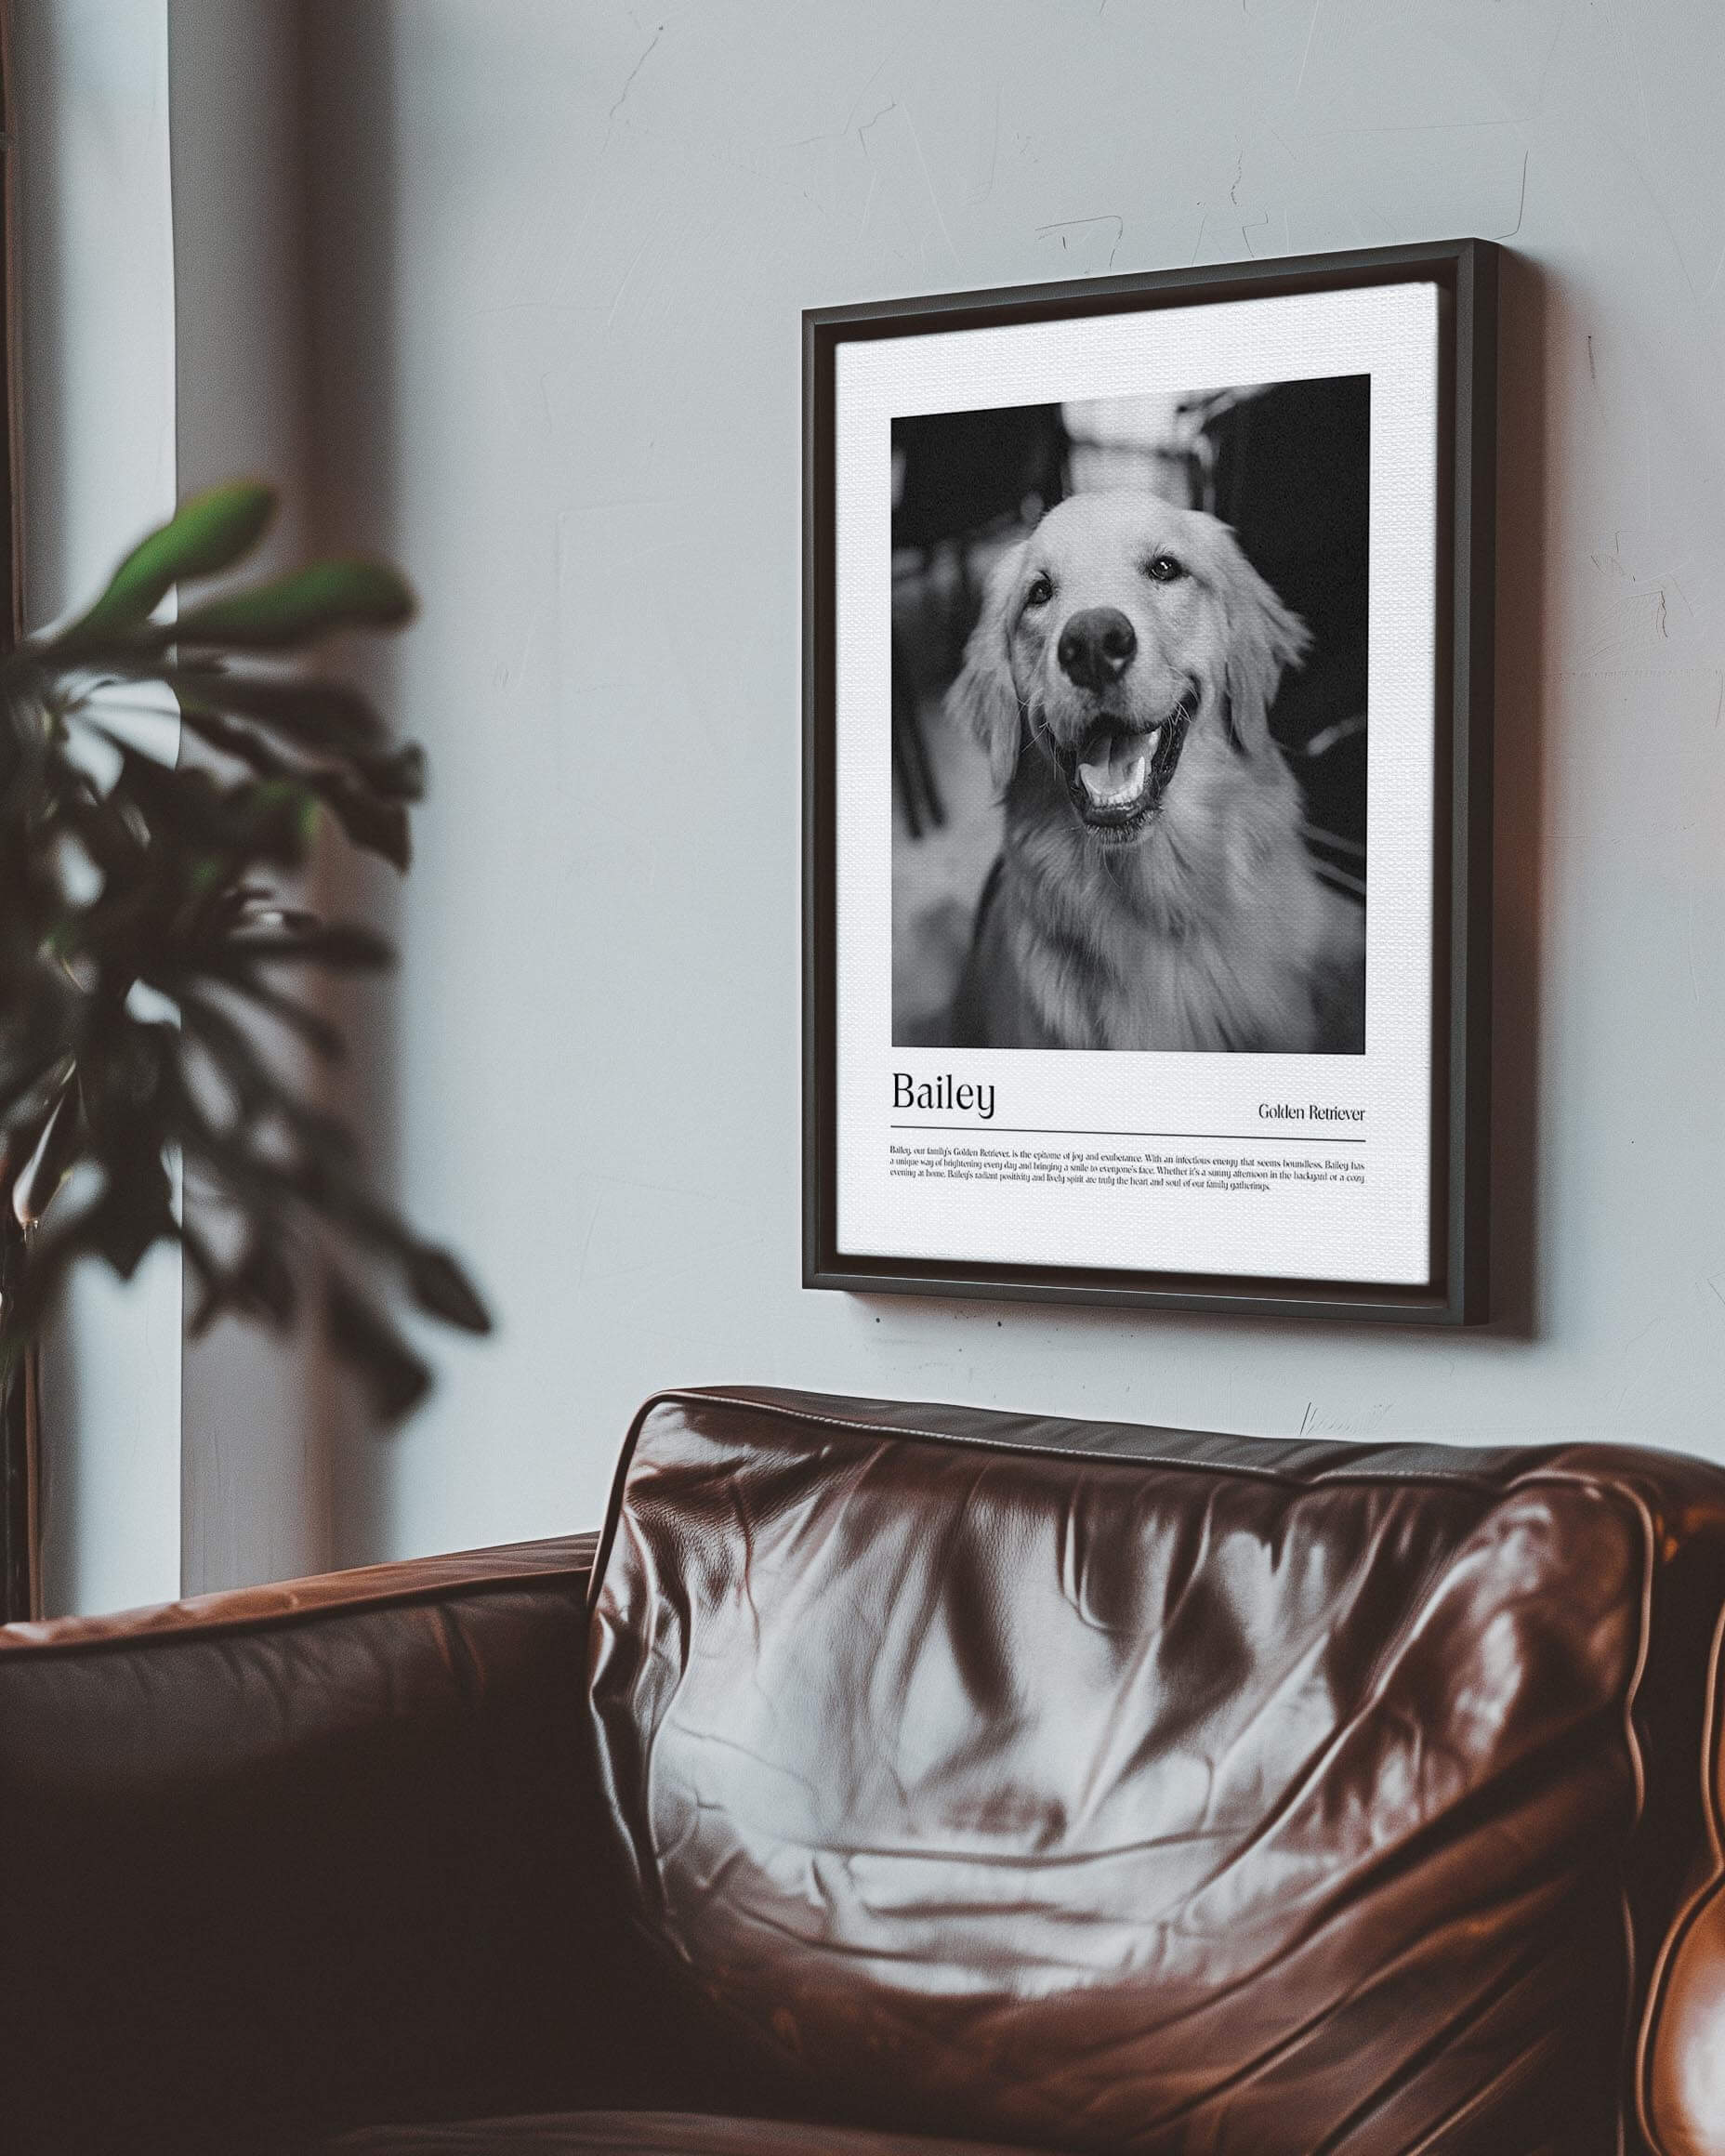 Golden retriever dog photo printed as black and white art and custom framed and personalized in modern home decor setting making a unique custom gift for dog mom and dog dad pet parents created by vogue paws personalized pet portraits